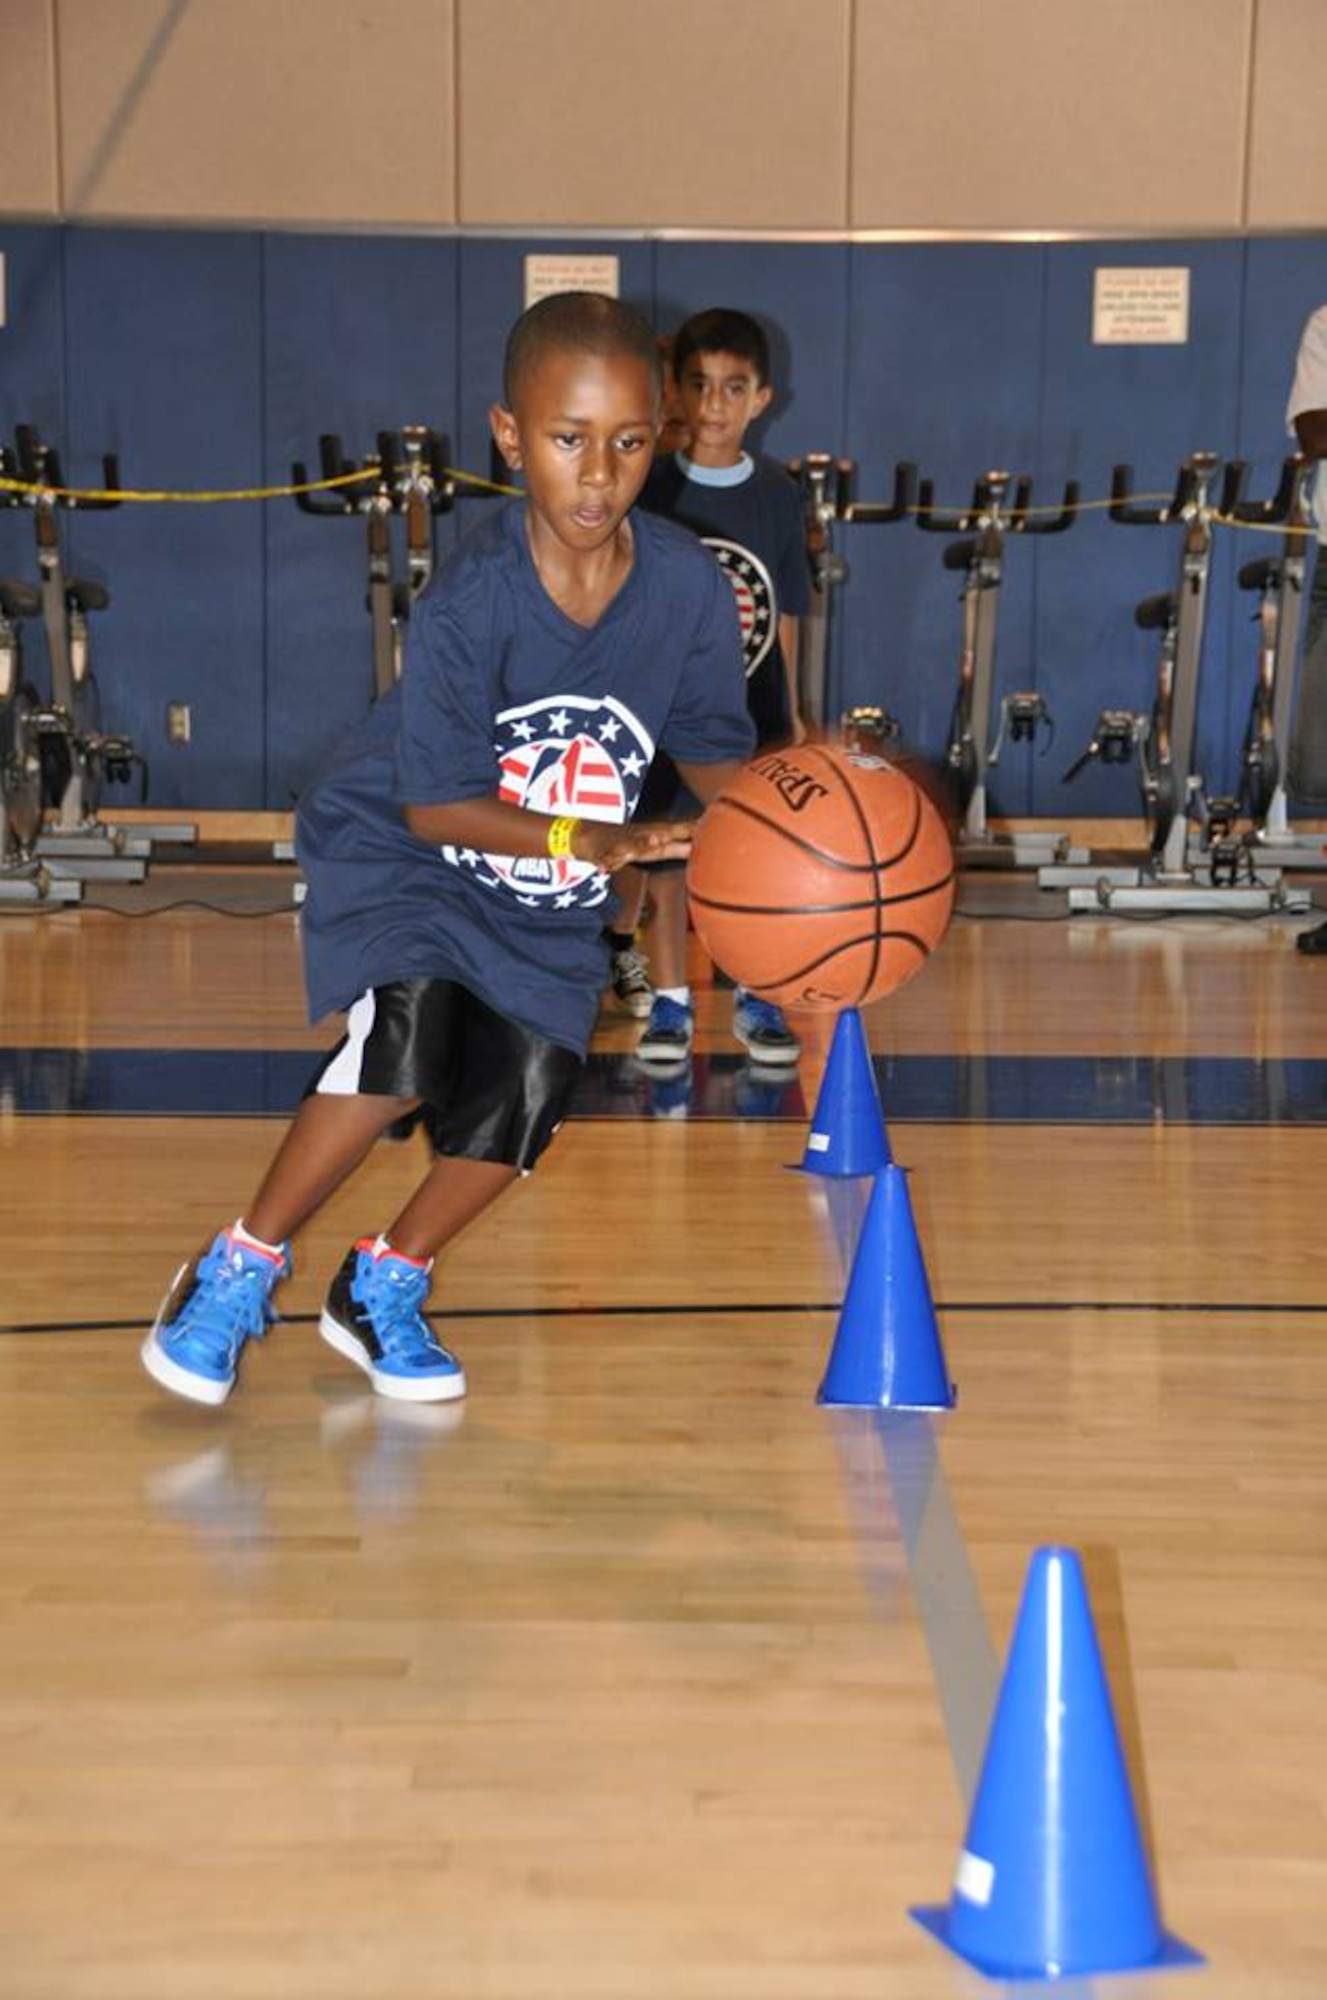 A military dependent dribbles the ball at March Air Reserve Base, Calif., during the NBA Cares Hoops for Troops basketball clinic Sunday, Sept. 8, 2013. The NBA Cares program sponsored the event in conjunction with the Healthy Base Initiative kickoff. (U.S. Air Force photo/Master Sgt. Linda Welz)